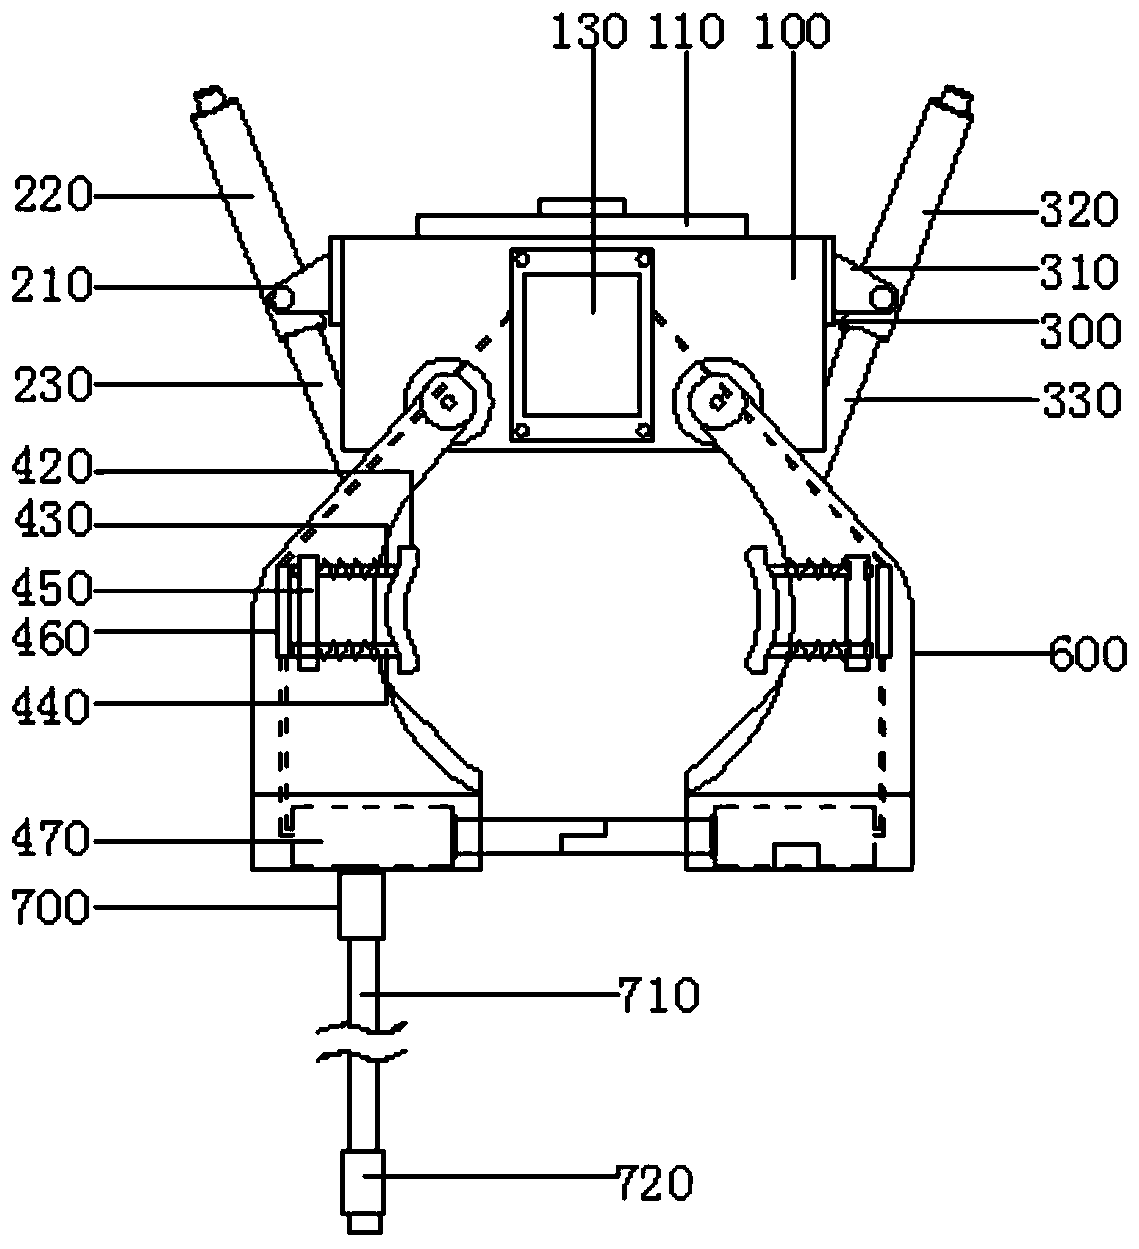 Clamp structure for grabbing mechanical equipment